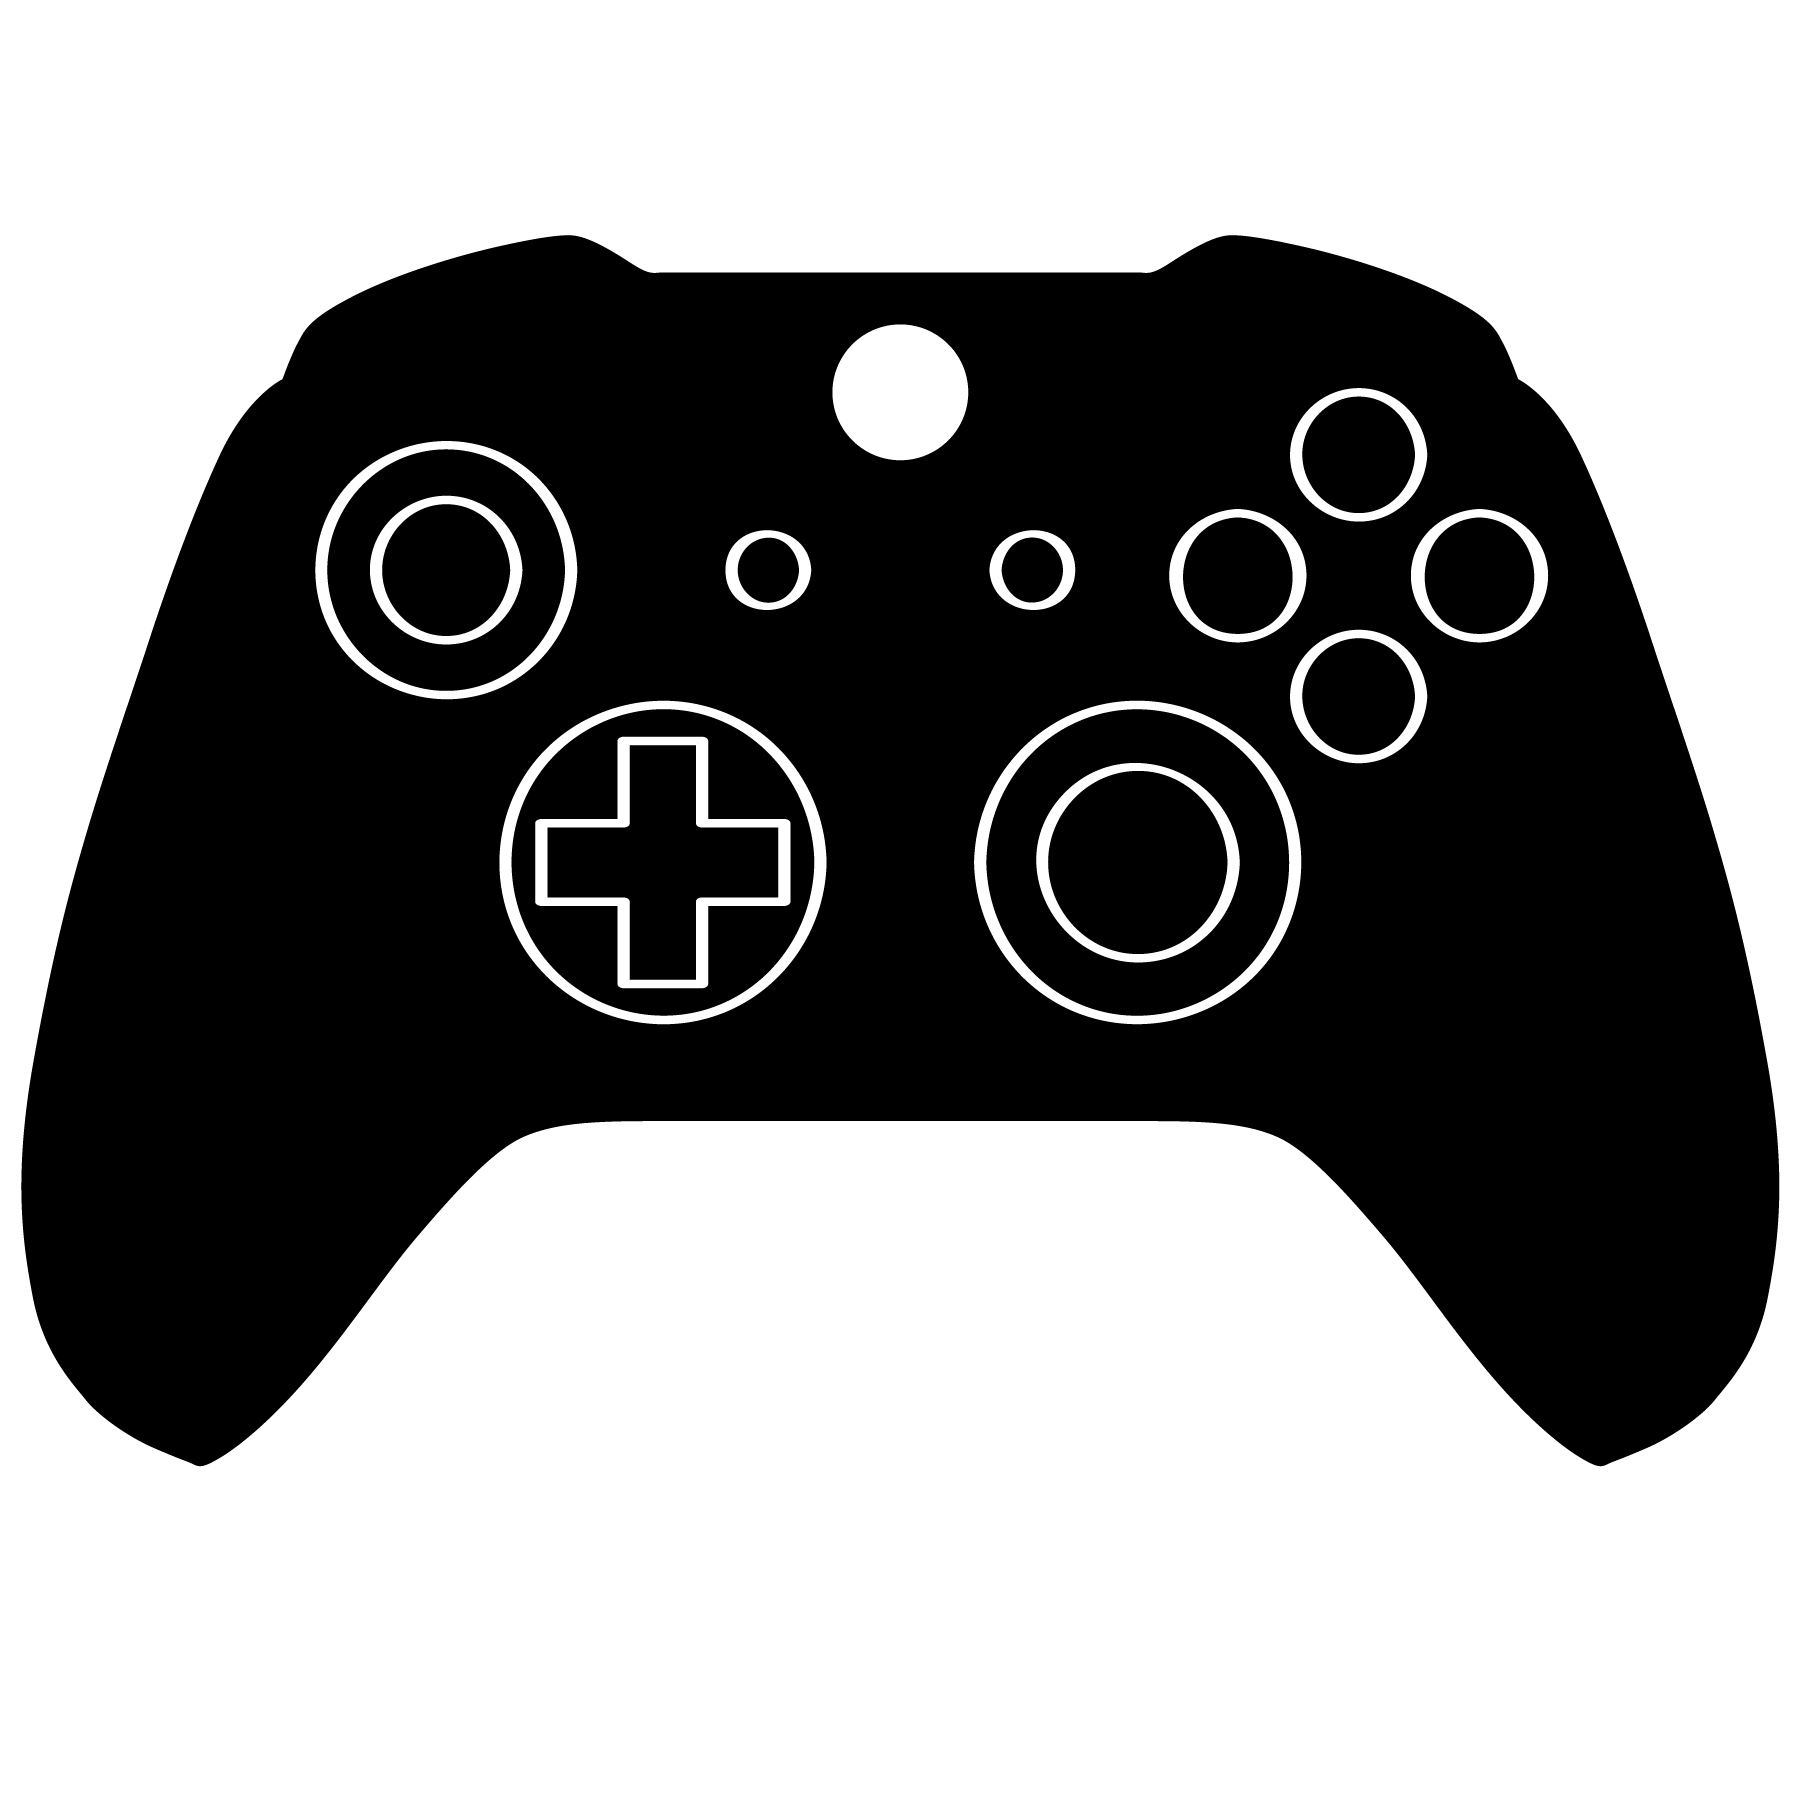 Download video game controllers - Download Free Vector Art, Stock ...